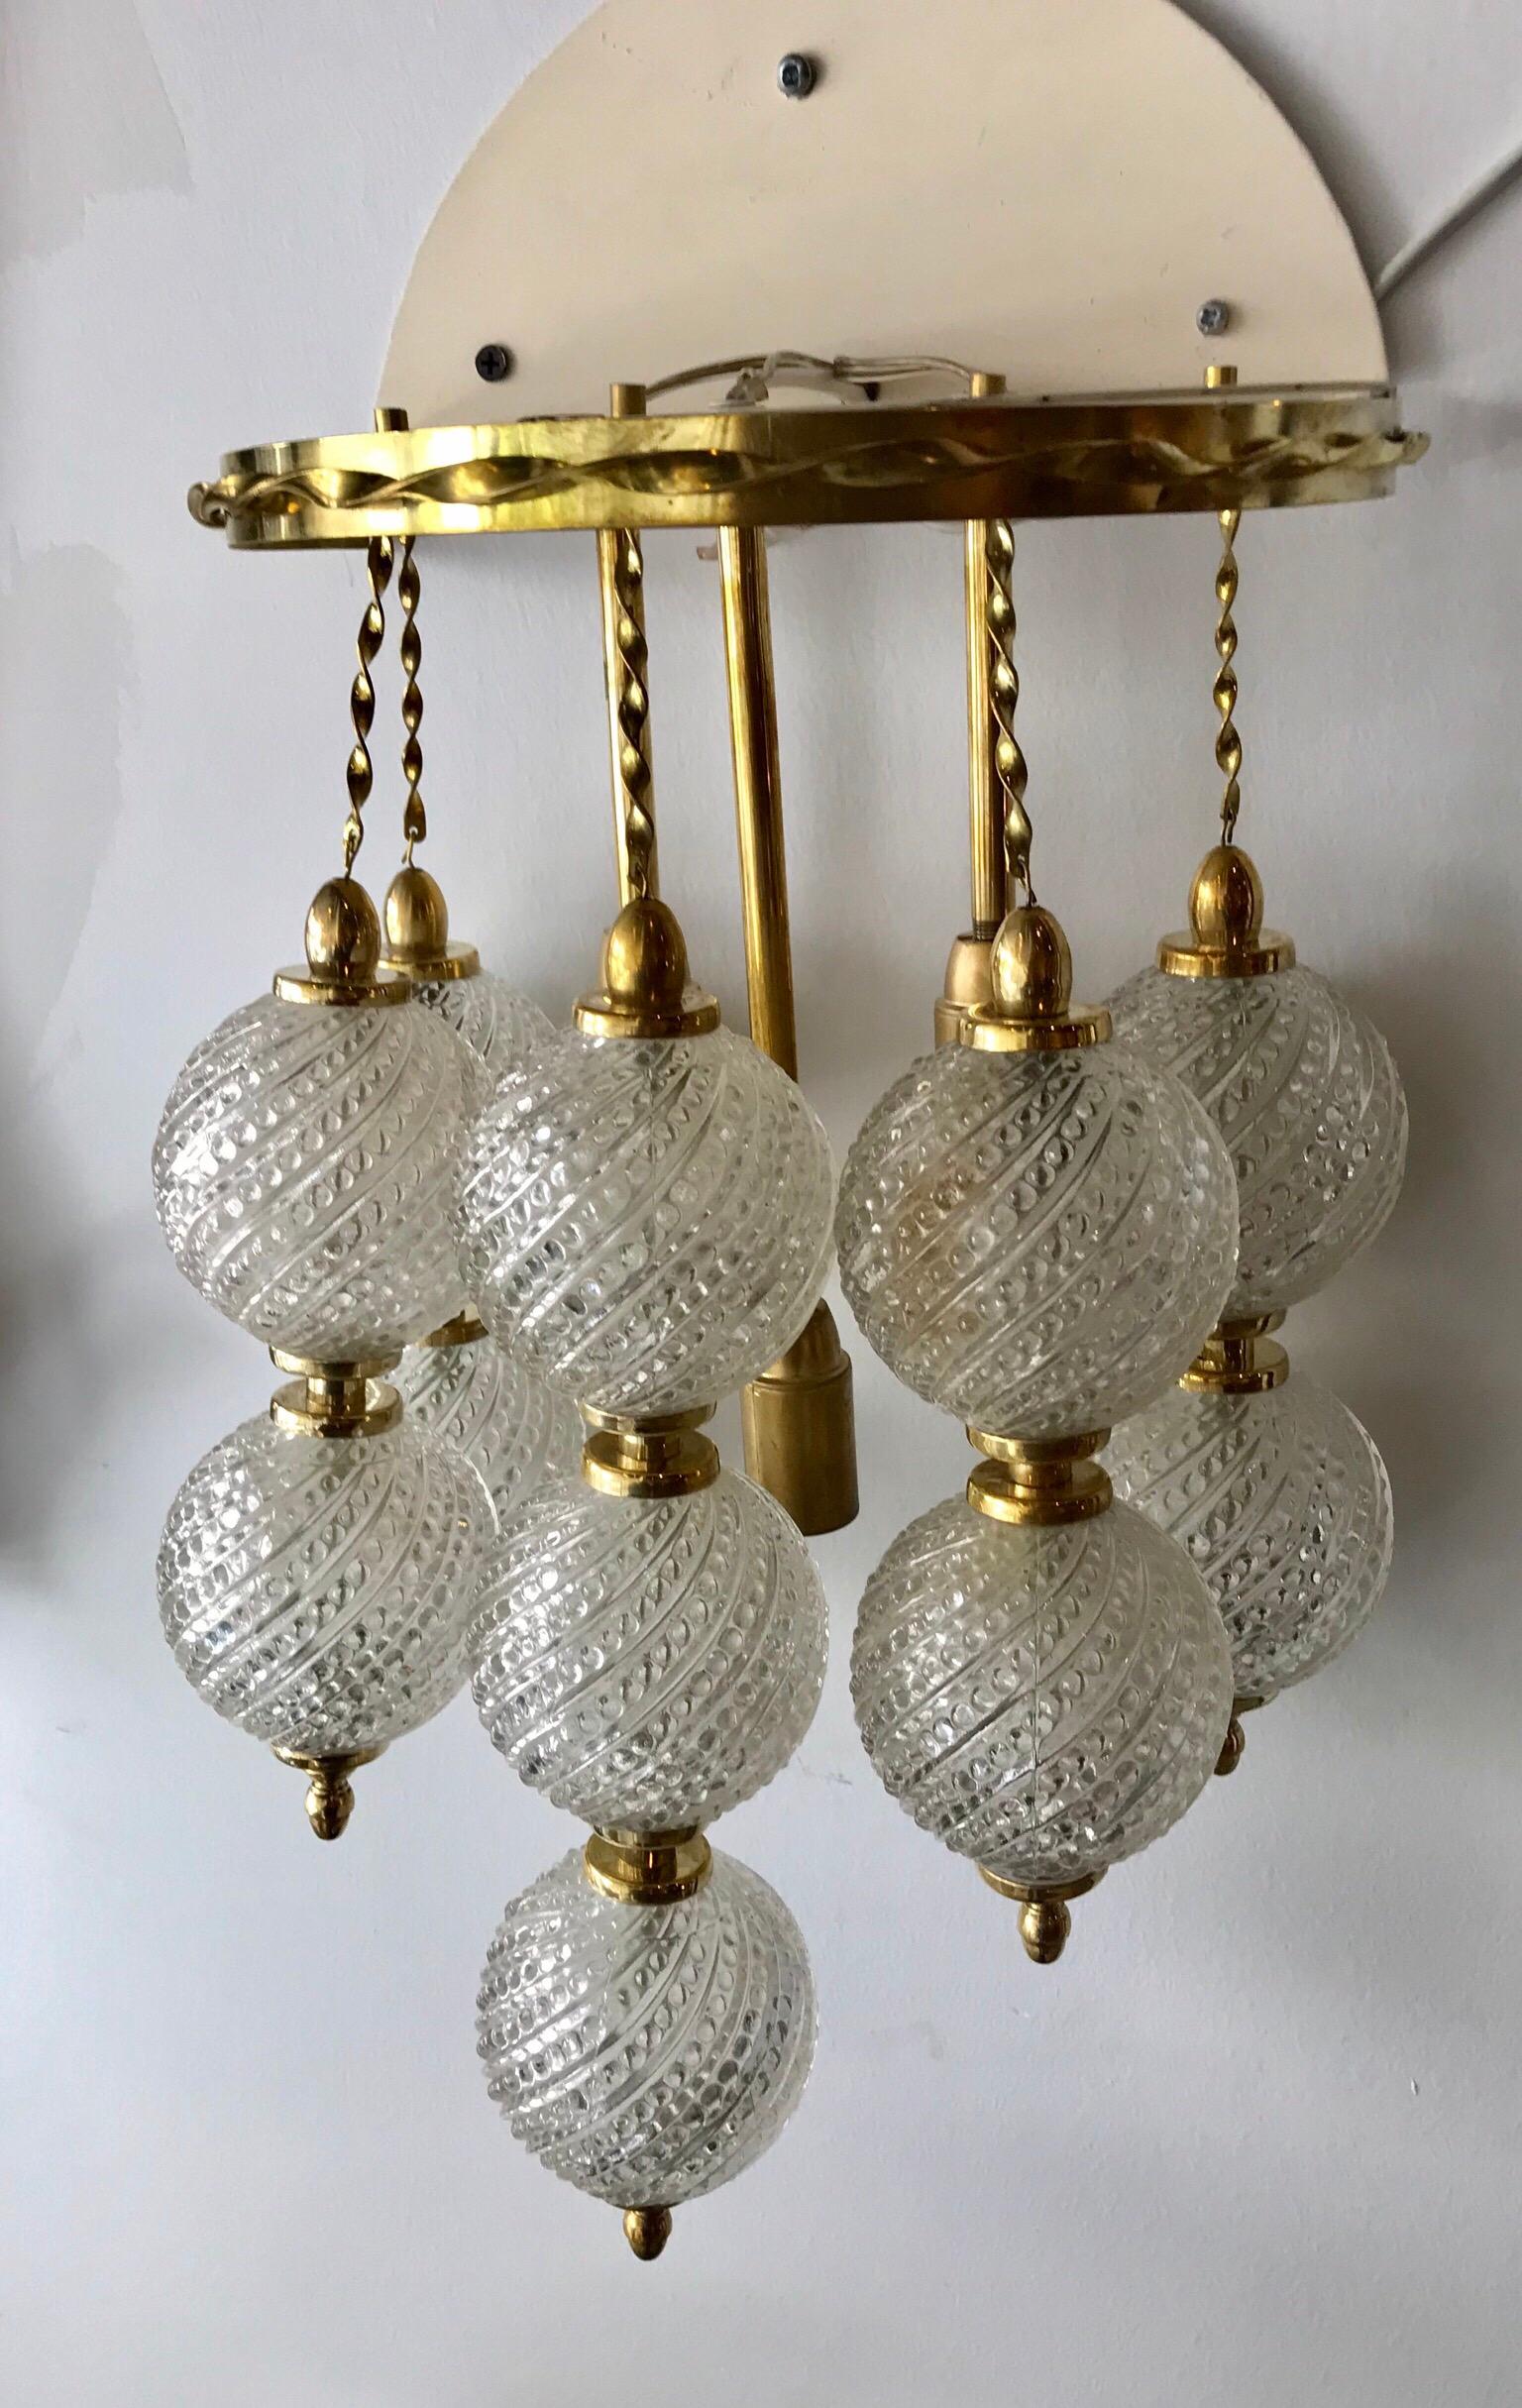 20th Century Pair of Midcentury Italian Brass and Venini Glass Hotel Bed Side Sconces